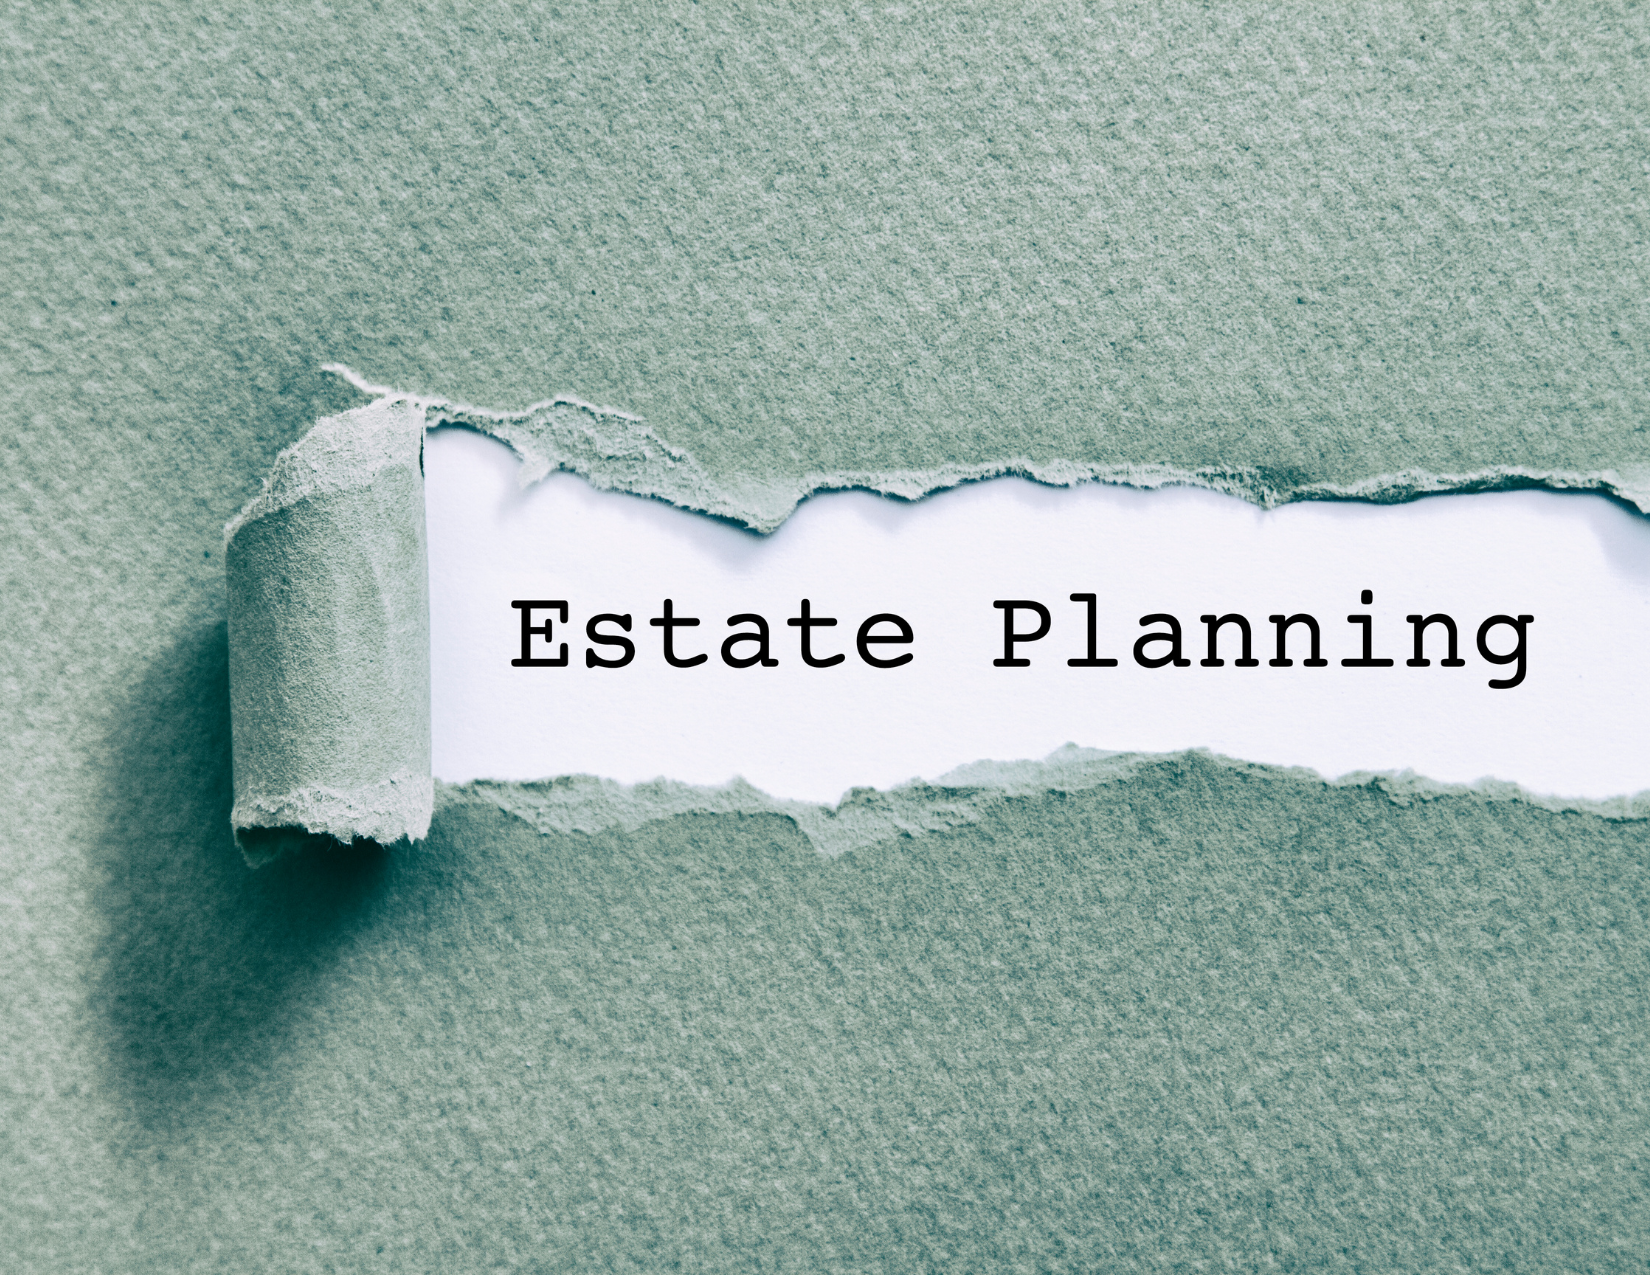  3 Vital Tips from an Oklahoma Estate Planning Attorney  